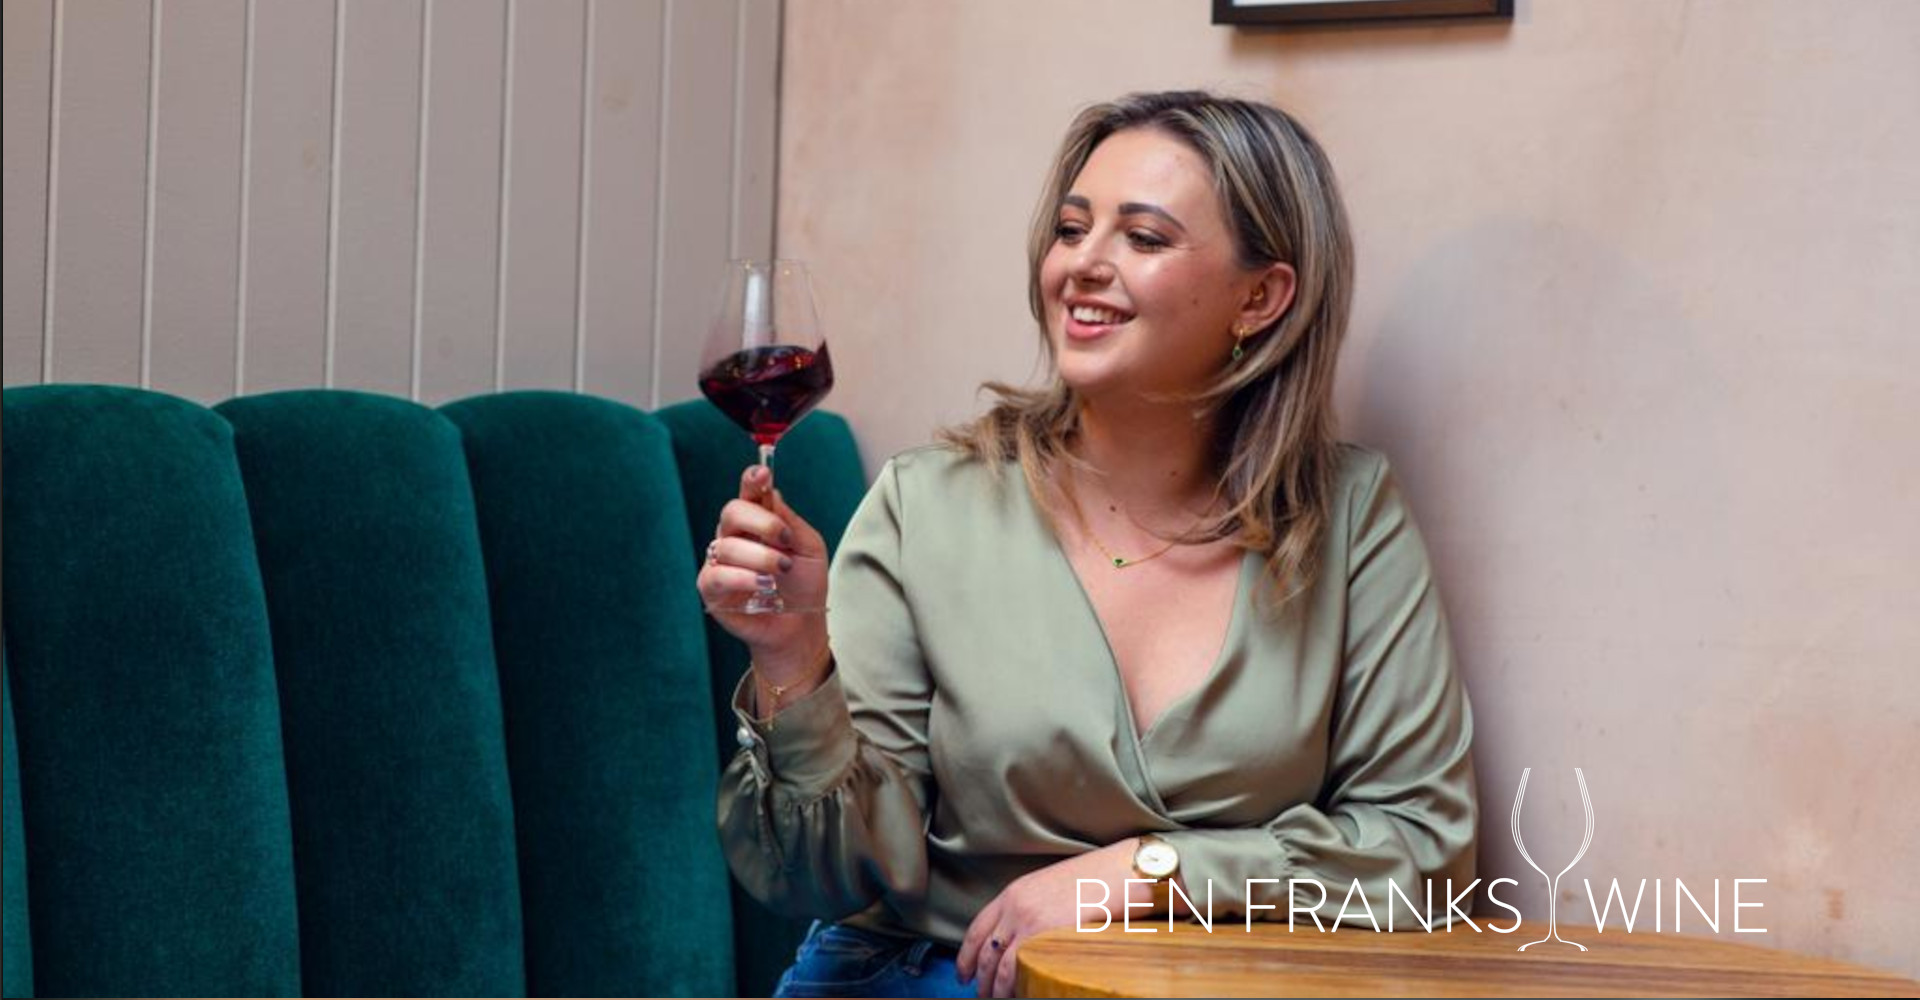 Jess calls on the drinks industry to invest in low and no alcohol wines